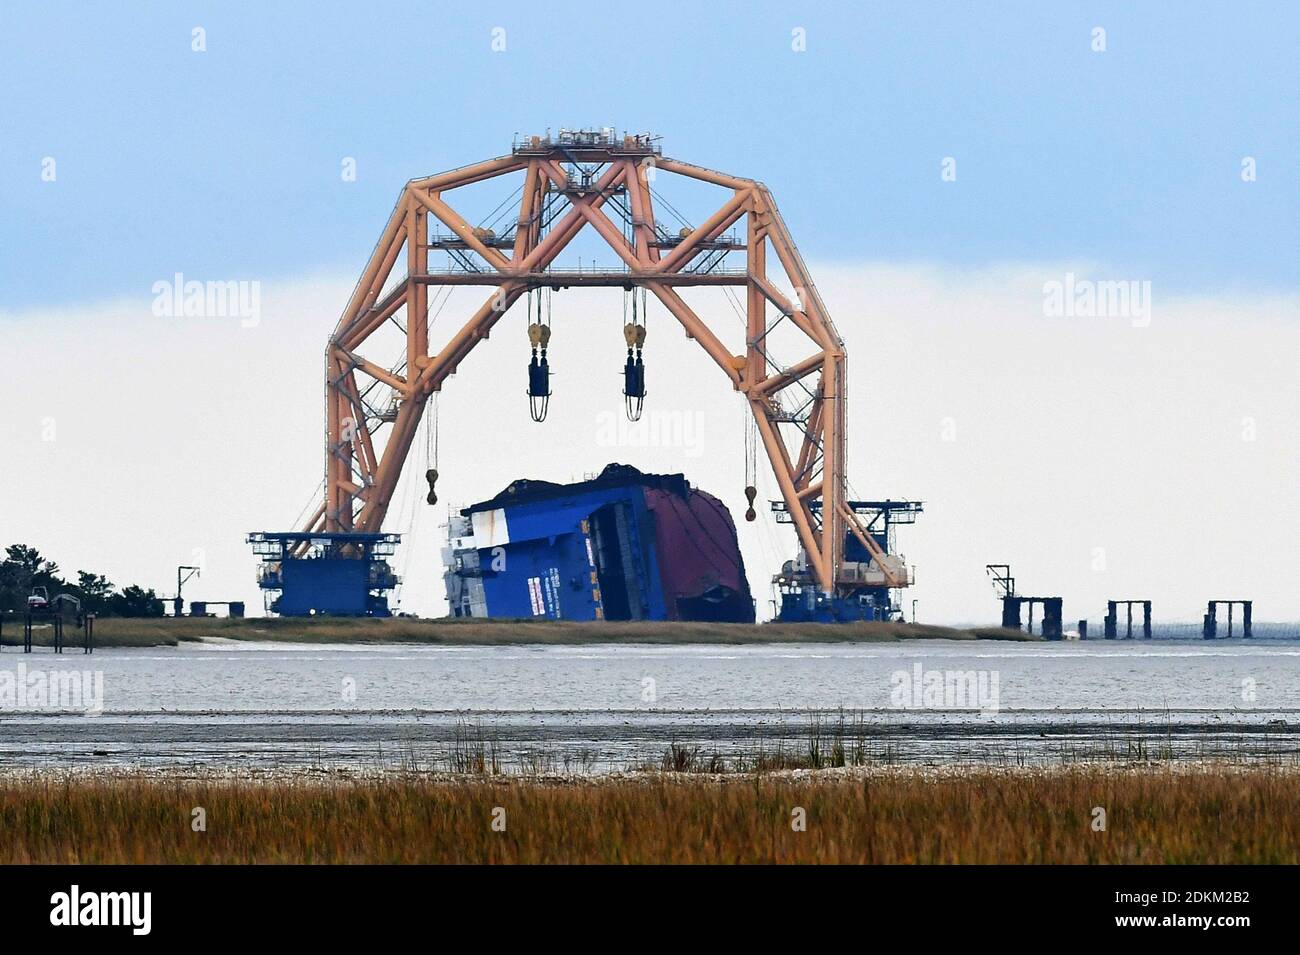 Georgia, USA. 14th Dec, 2020. December 14, 2020 - St. Simons Island, Georgia, United States - The Golden Ray cargo ship lies on its side under a  heavy-lift twin-gantry catamaran on December 14, 2020 in St. Simons Island, Georgia. A salvage company is cutting the vessel into eight segments, with the bow section having been cut and removed by a barge to be scrapped. The vehicle carrier, loaded with 4200 new cars, capsized in St. Simons Island Sound on September 8, 2019 as it was leaving the Port of Brunswick, Georgia. (Paul Hennessy/Alamy) Credit: Paul Hennessy/Alamy Live News Stock Photo